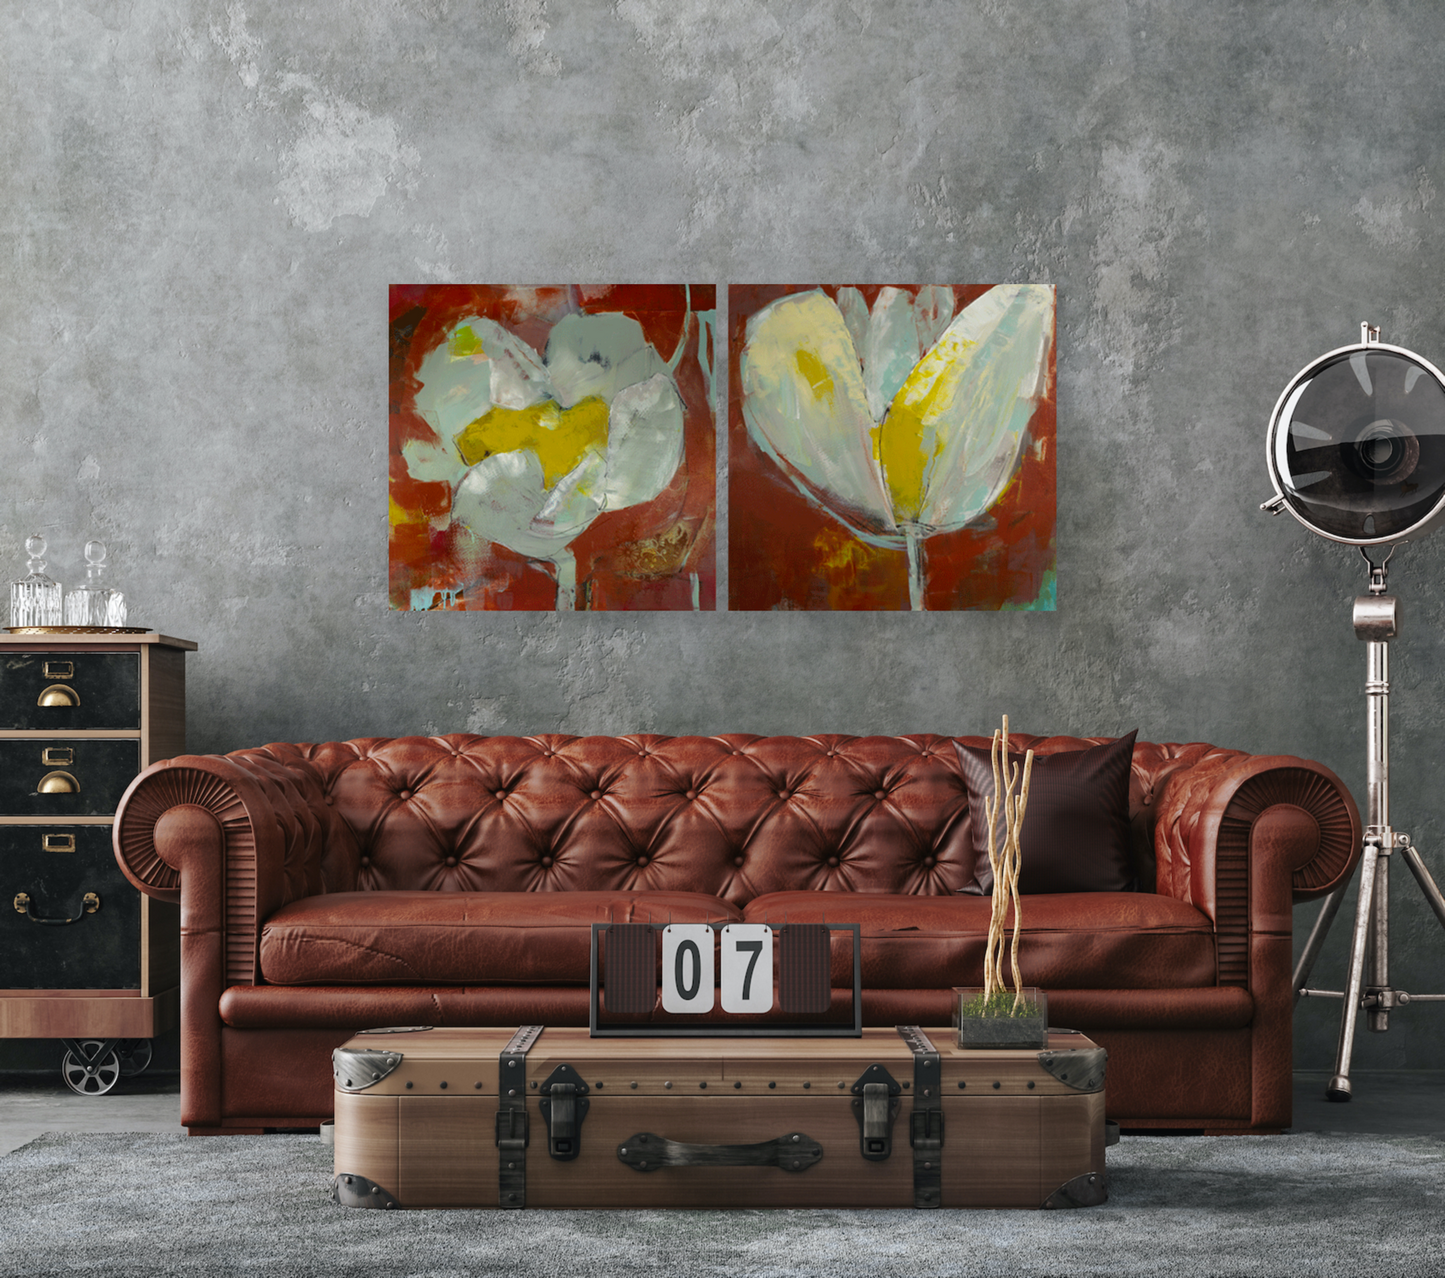 This stunning art piece set will look great in your living room.